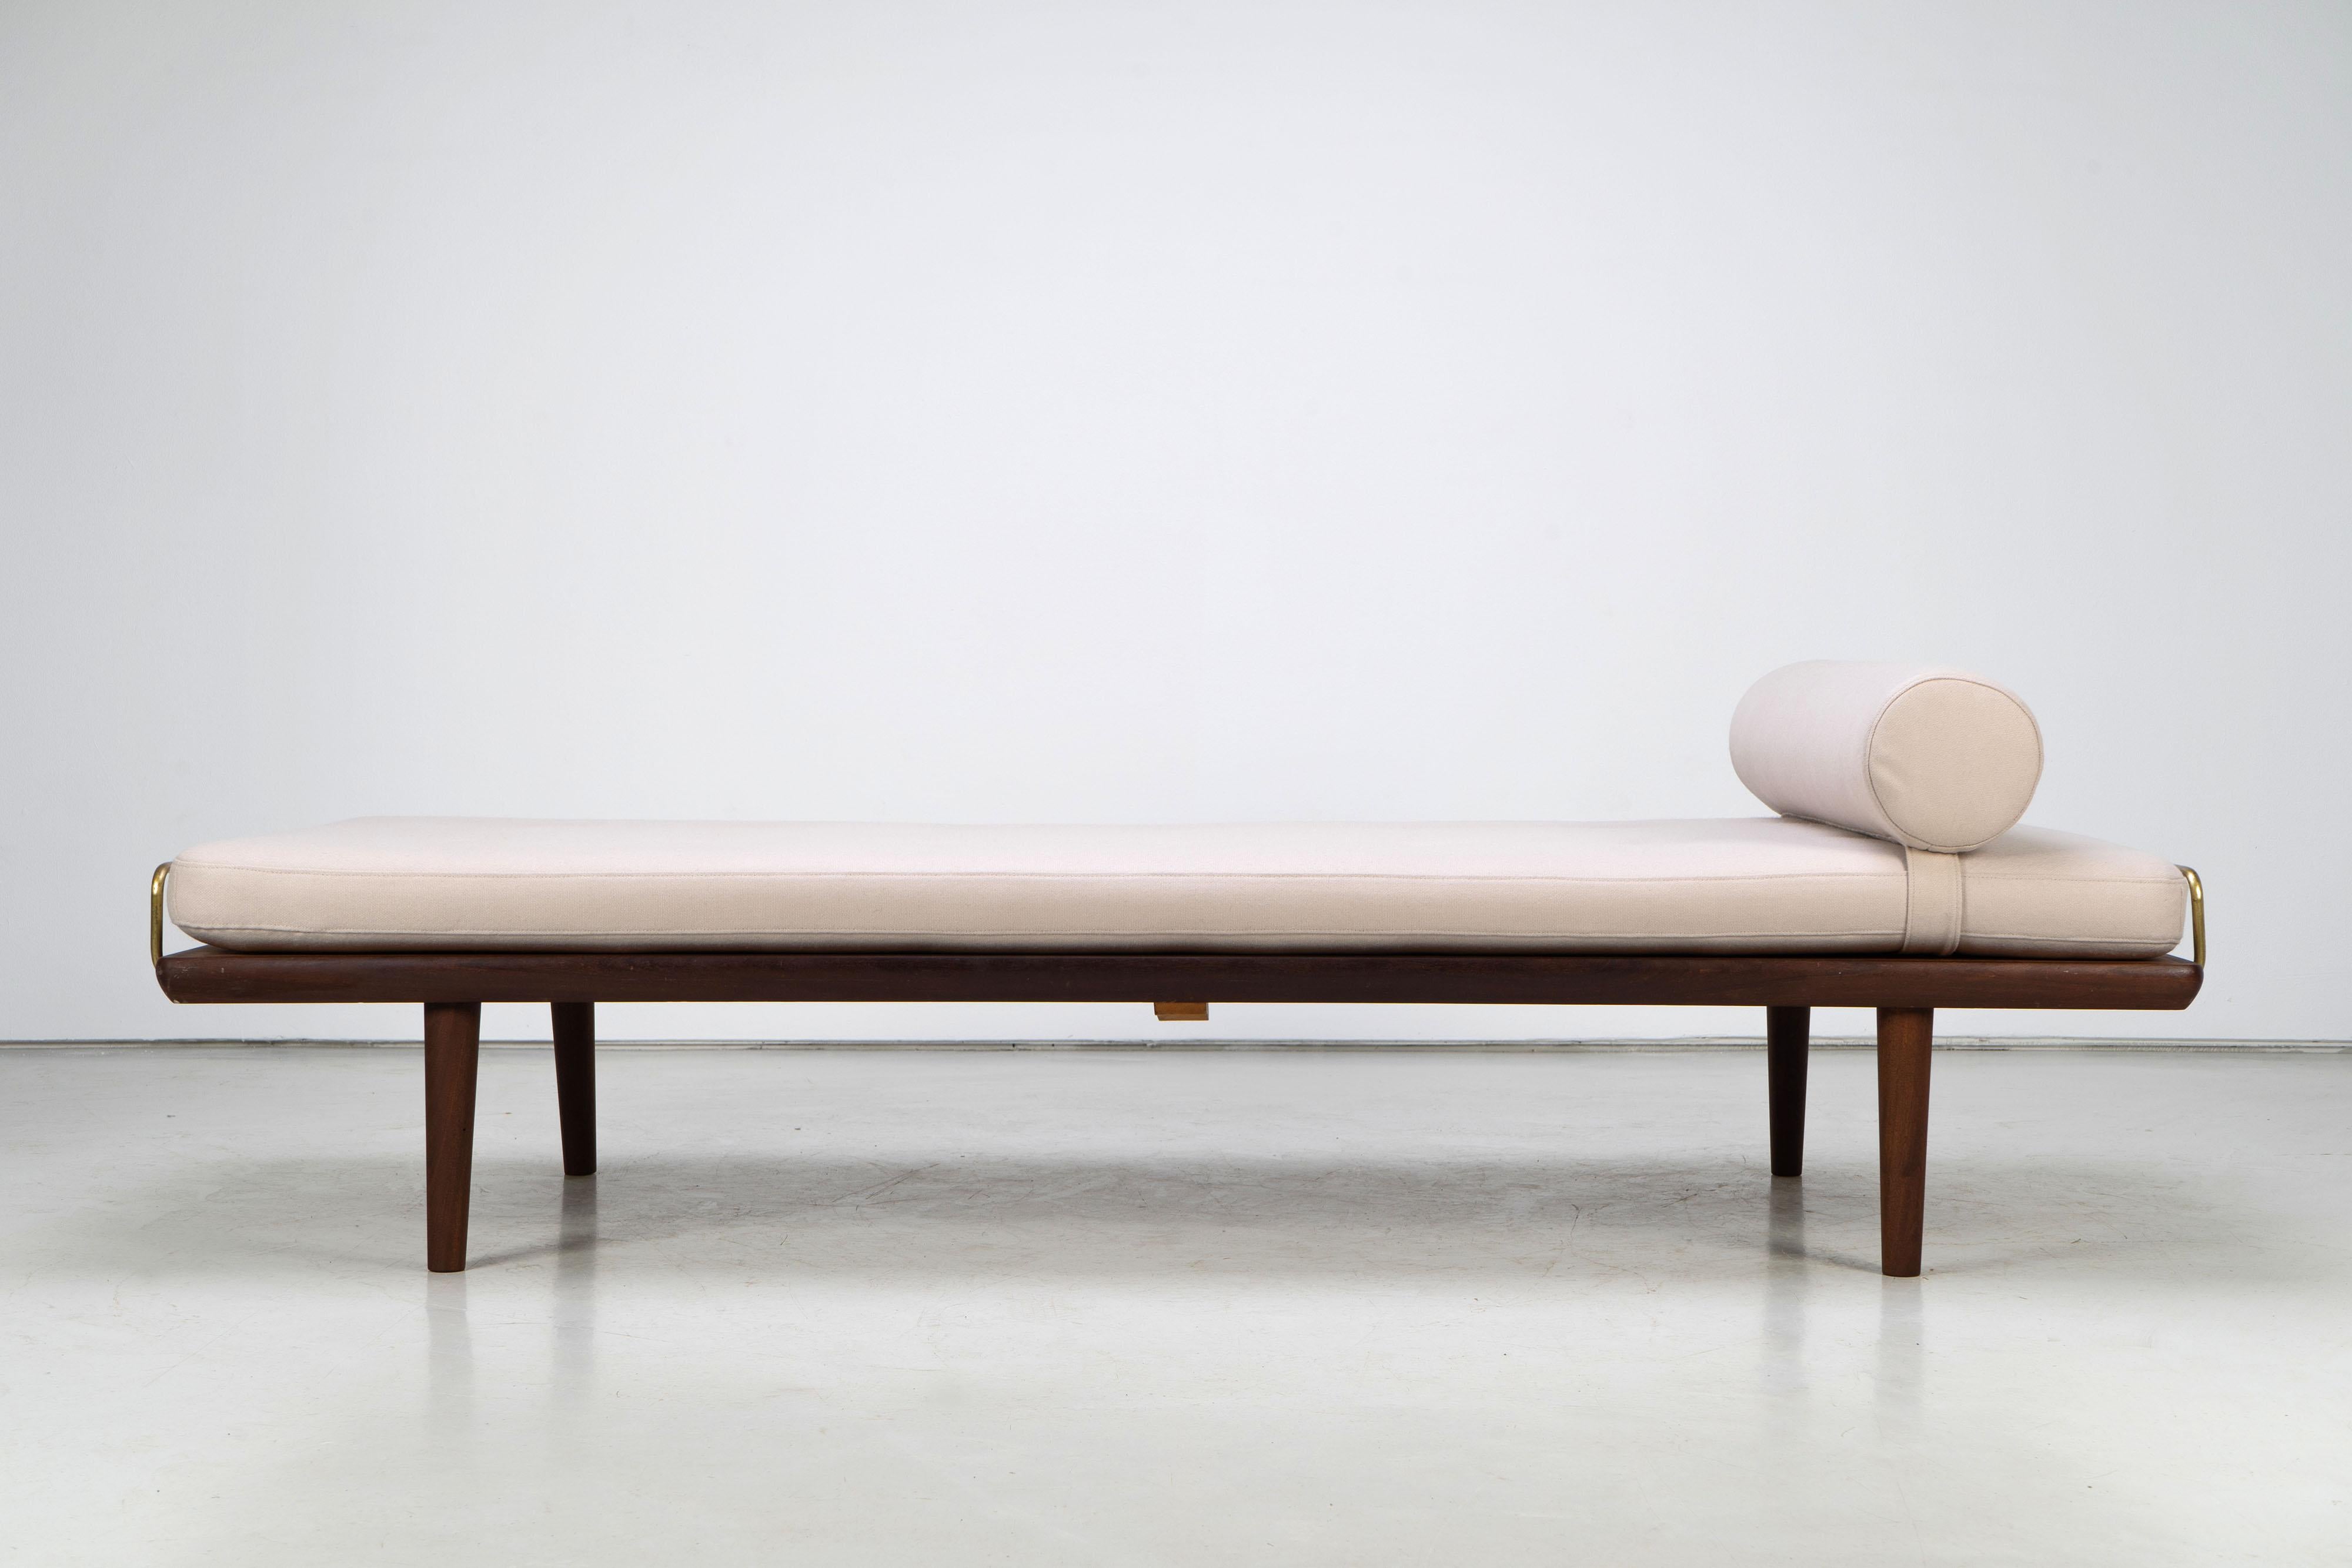 Daybed GE 19 by Hans J. Wegner. The daybed is made of a beautiful teak wood. New foam and fabric.